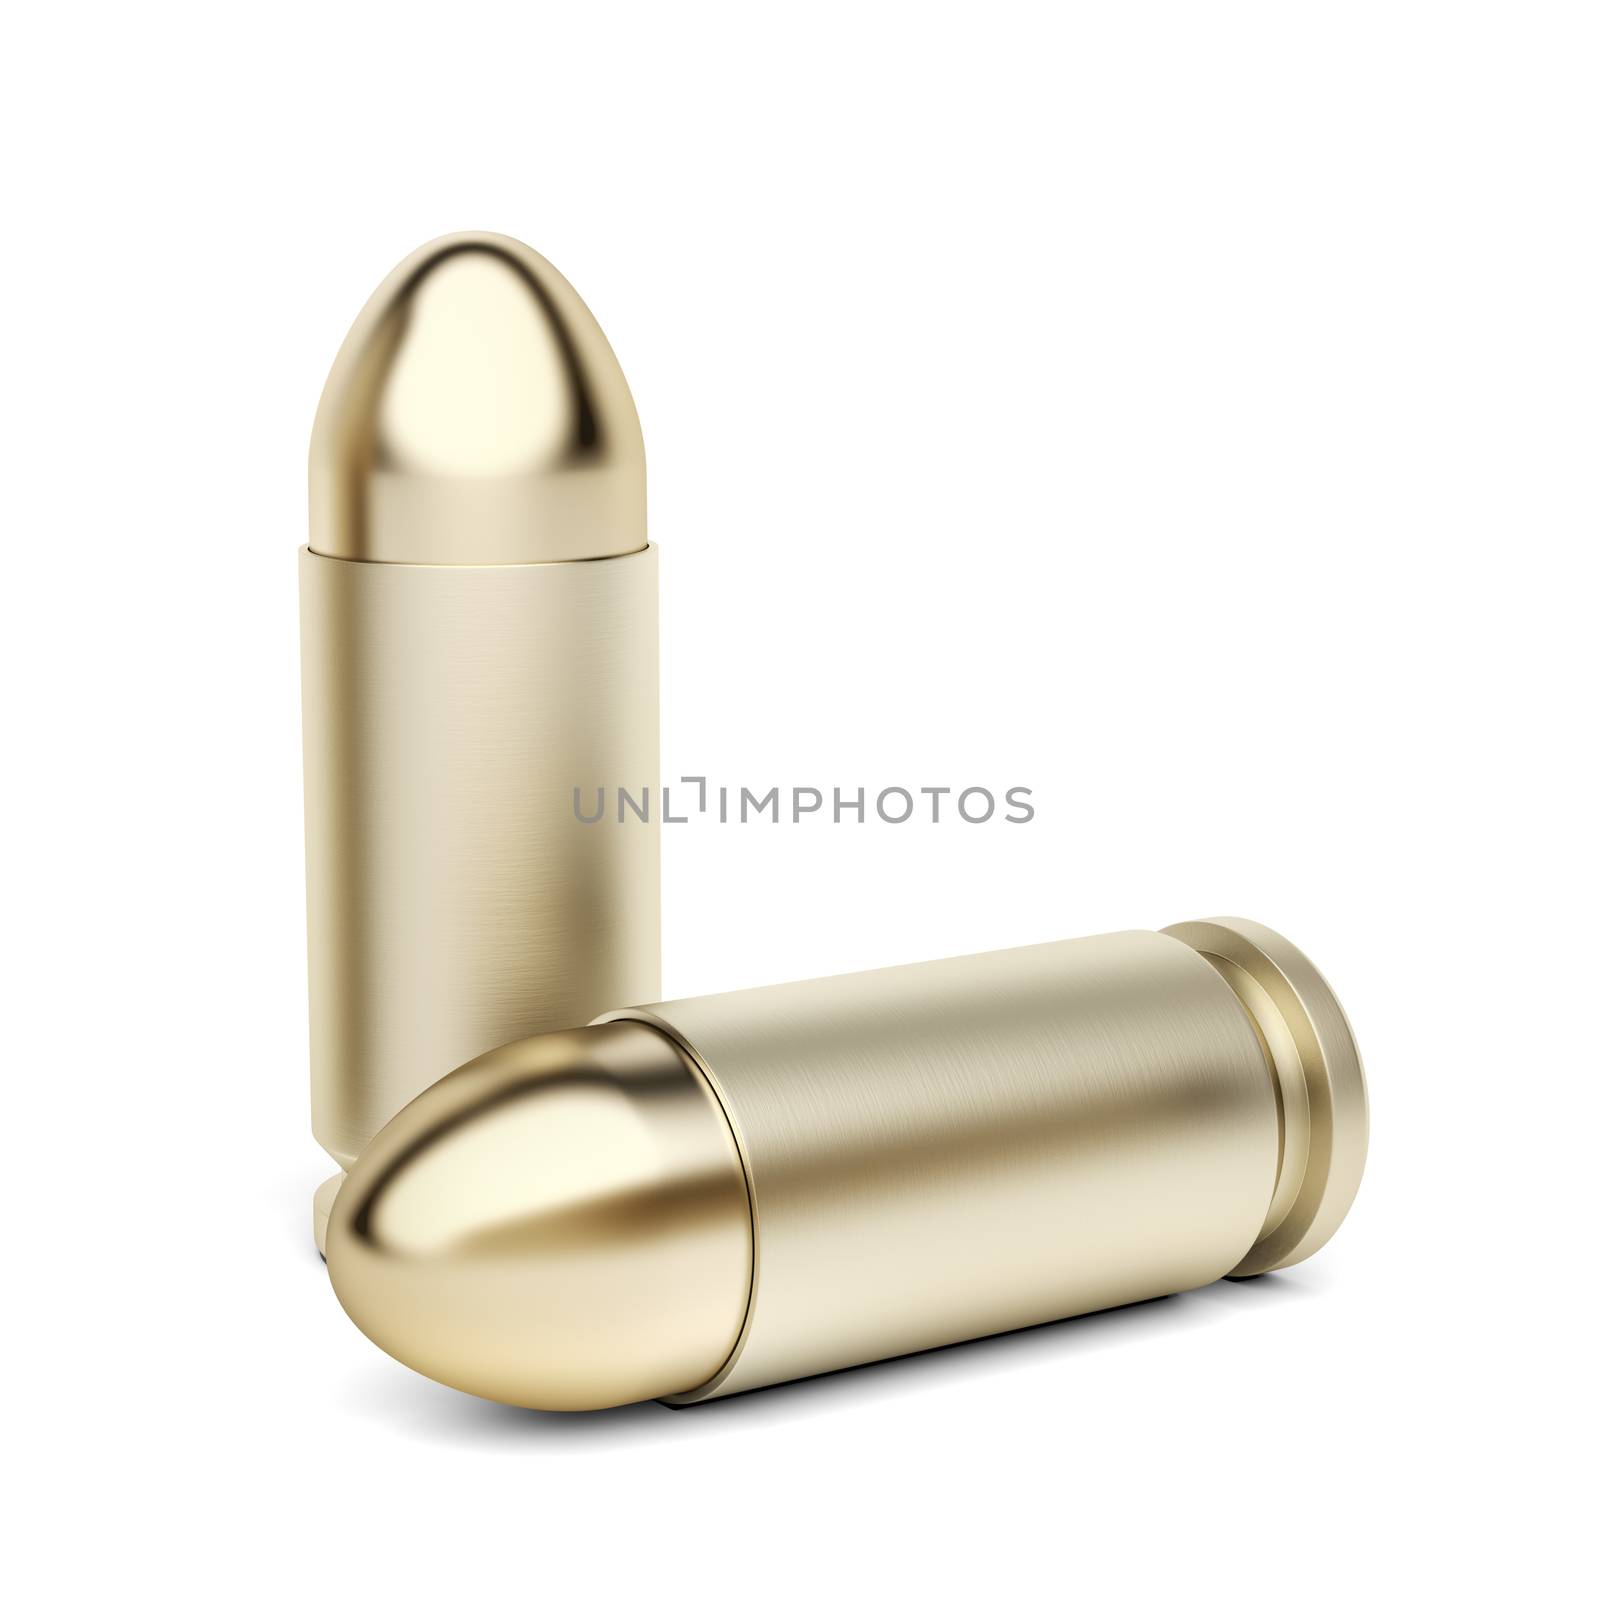 Two handgun bullets by magraphics